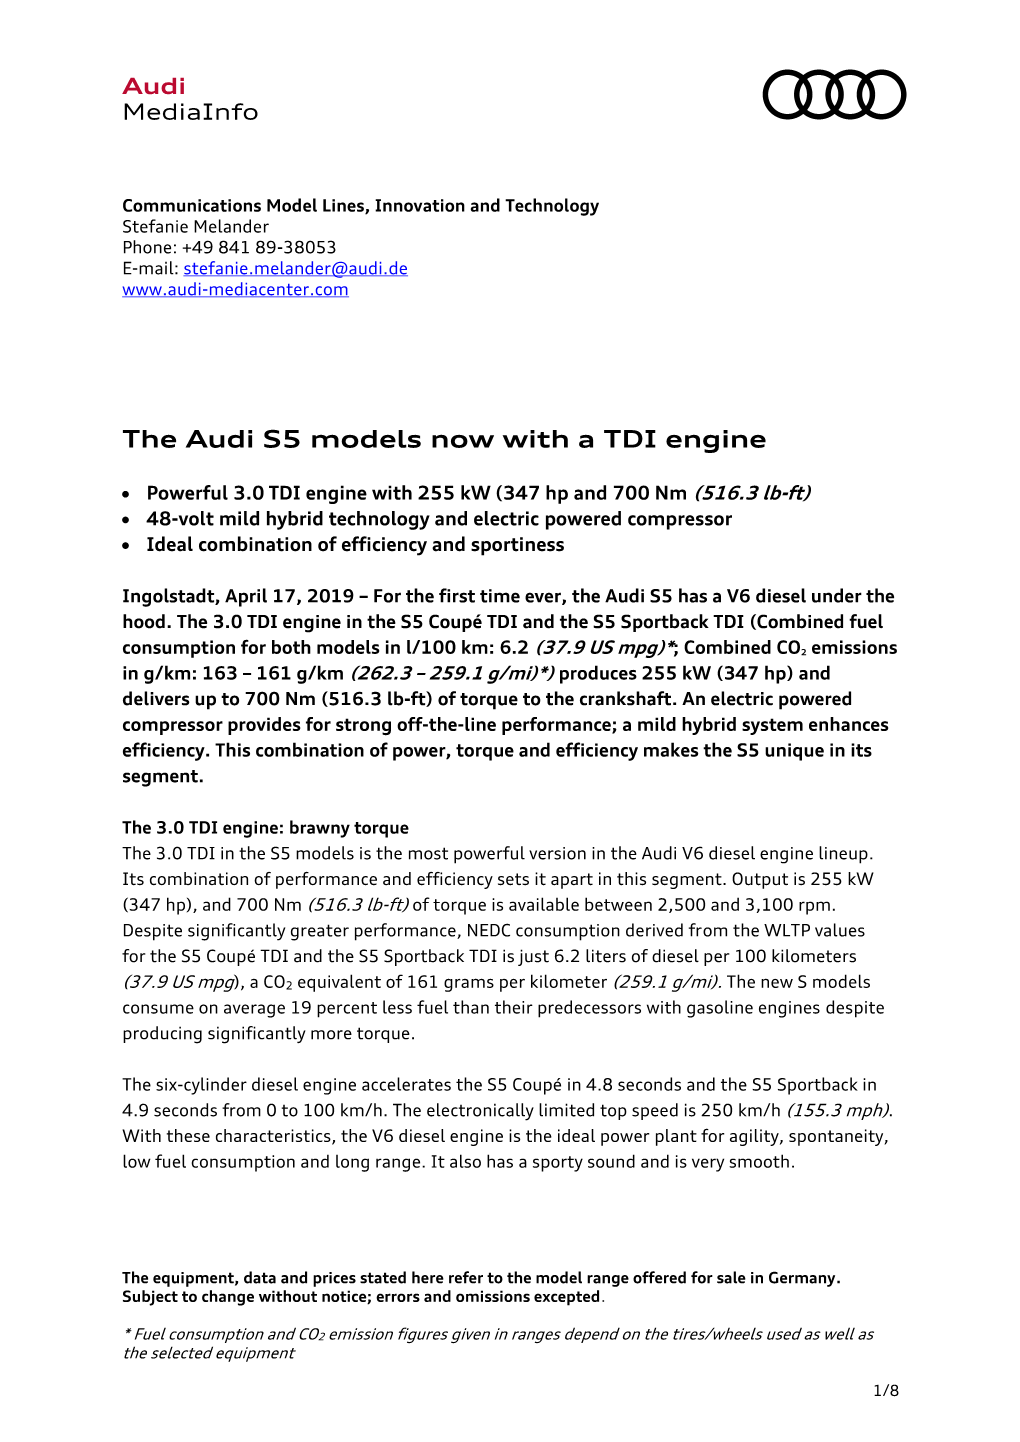 The Audi S5 Models Now with a TDI Engine